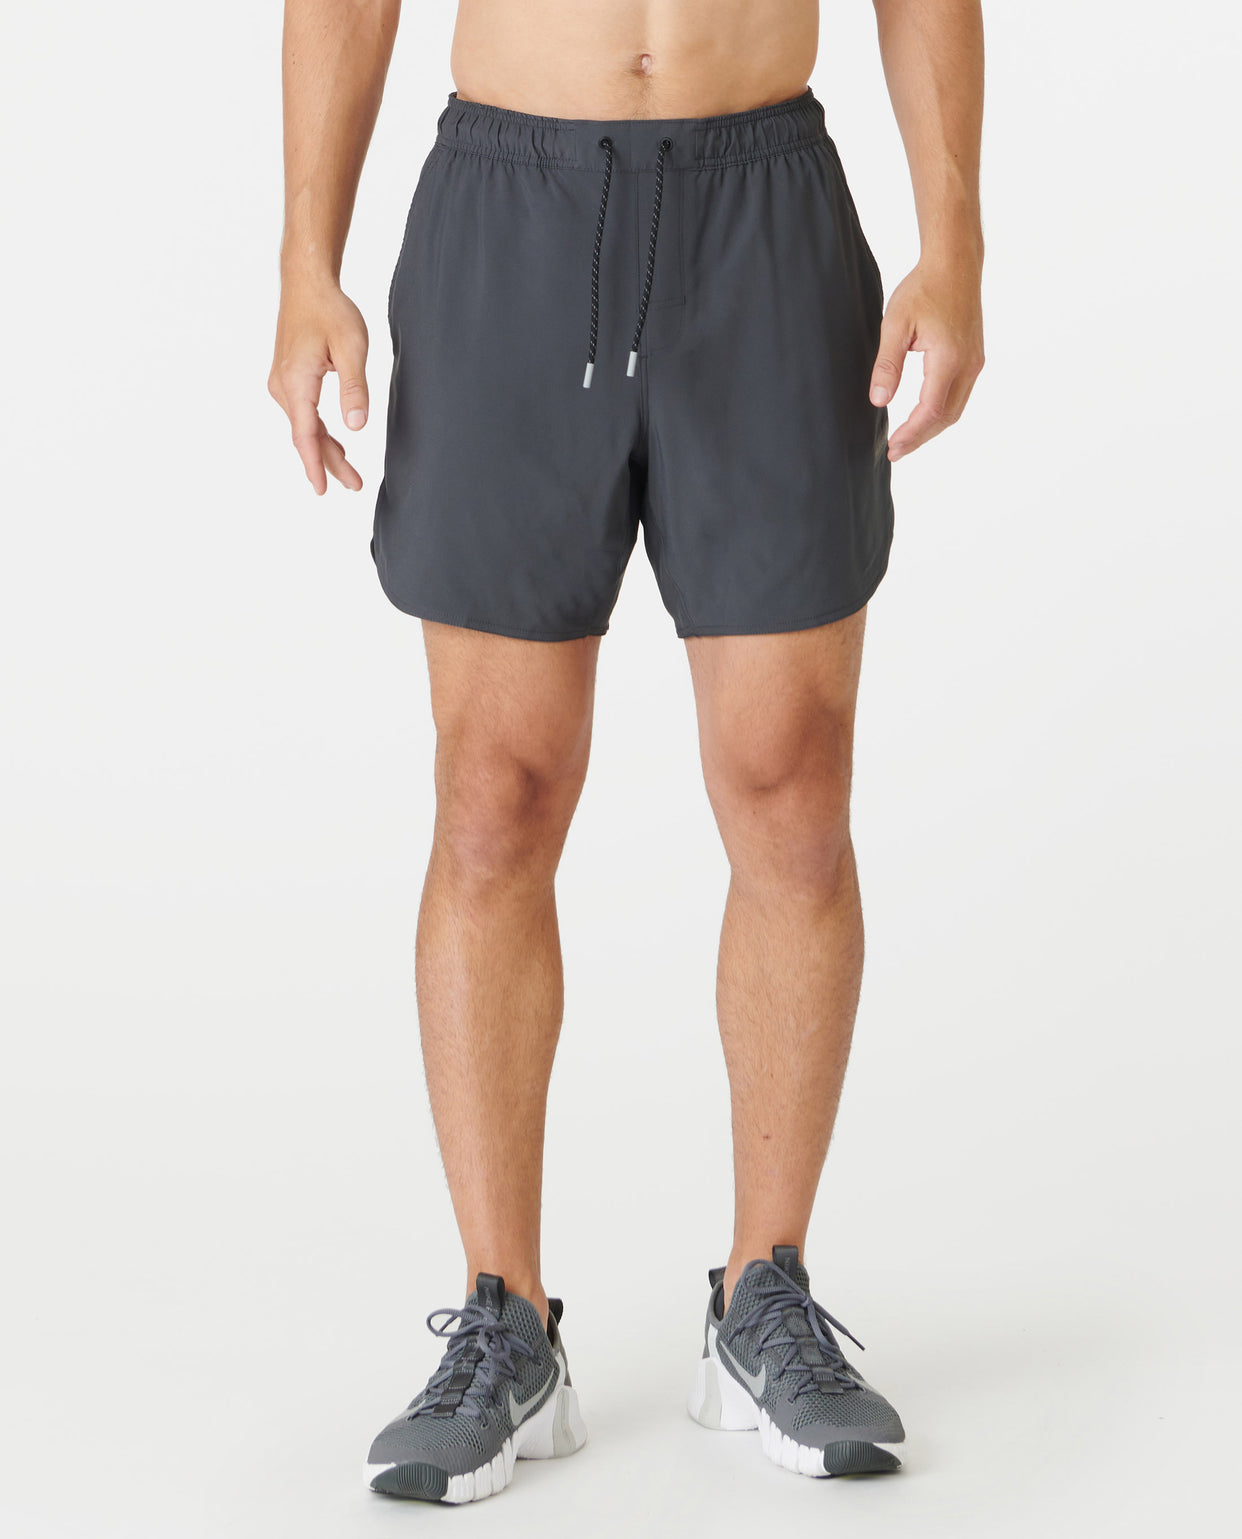 Buy Charcoal Grey Shorts from Next Luxembourg